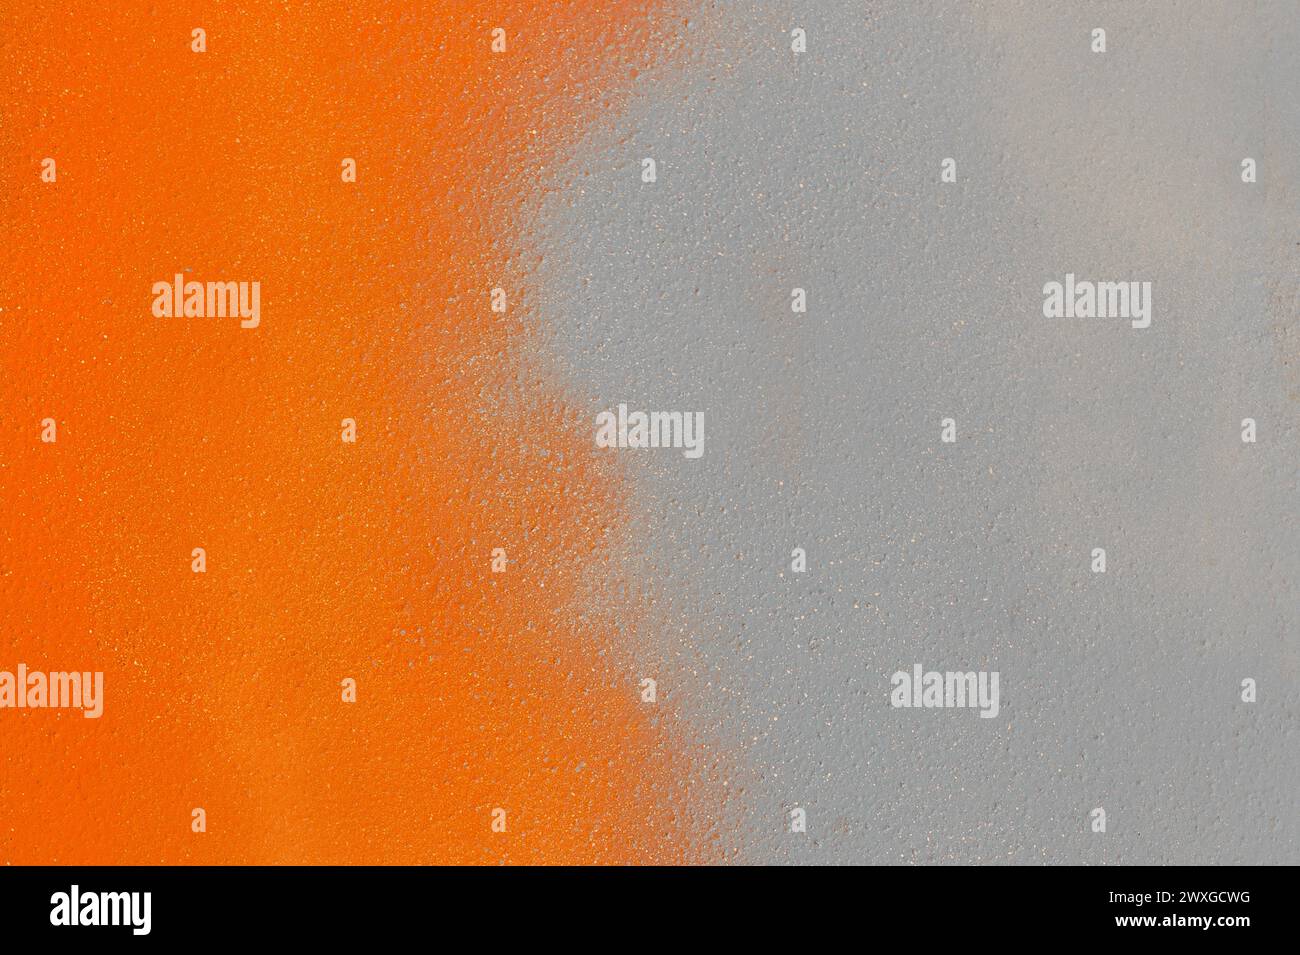 Orange and Grey Paint Two Colors Abstract Design Wall Surface Texture Background. Stock Photo